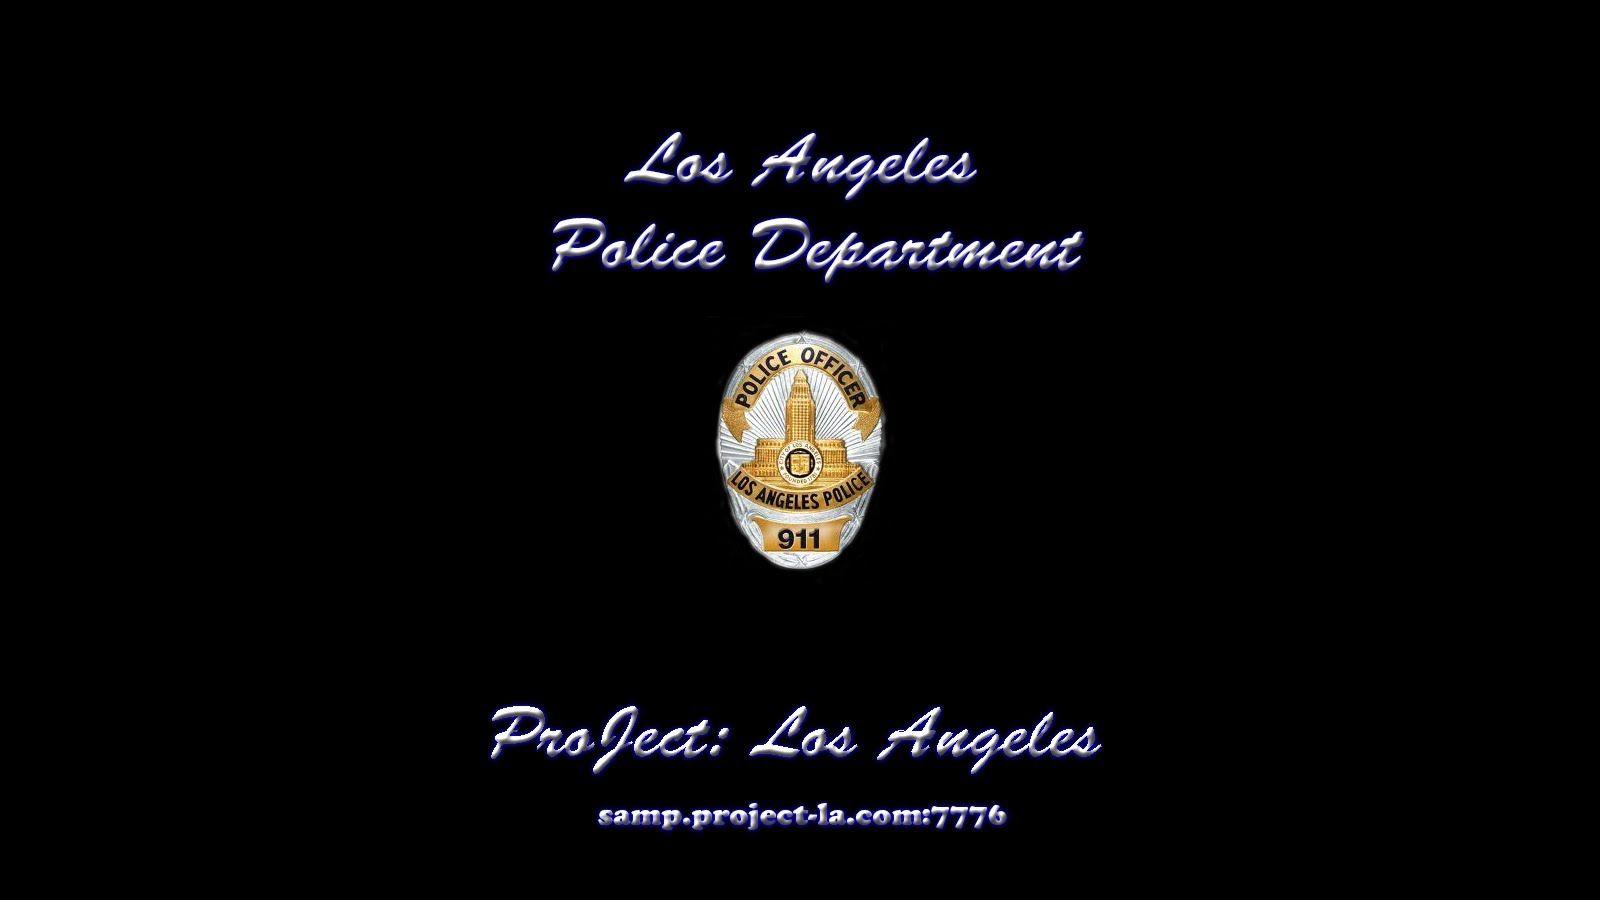 Project Los Angeles: Los Angeles Police Department